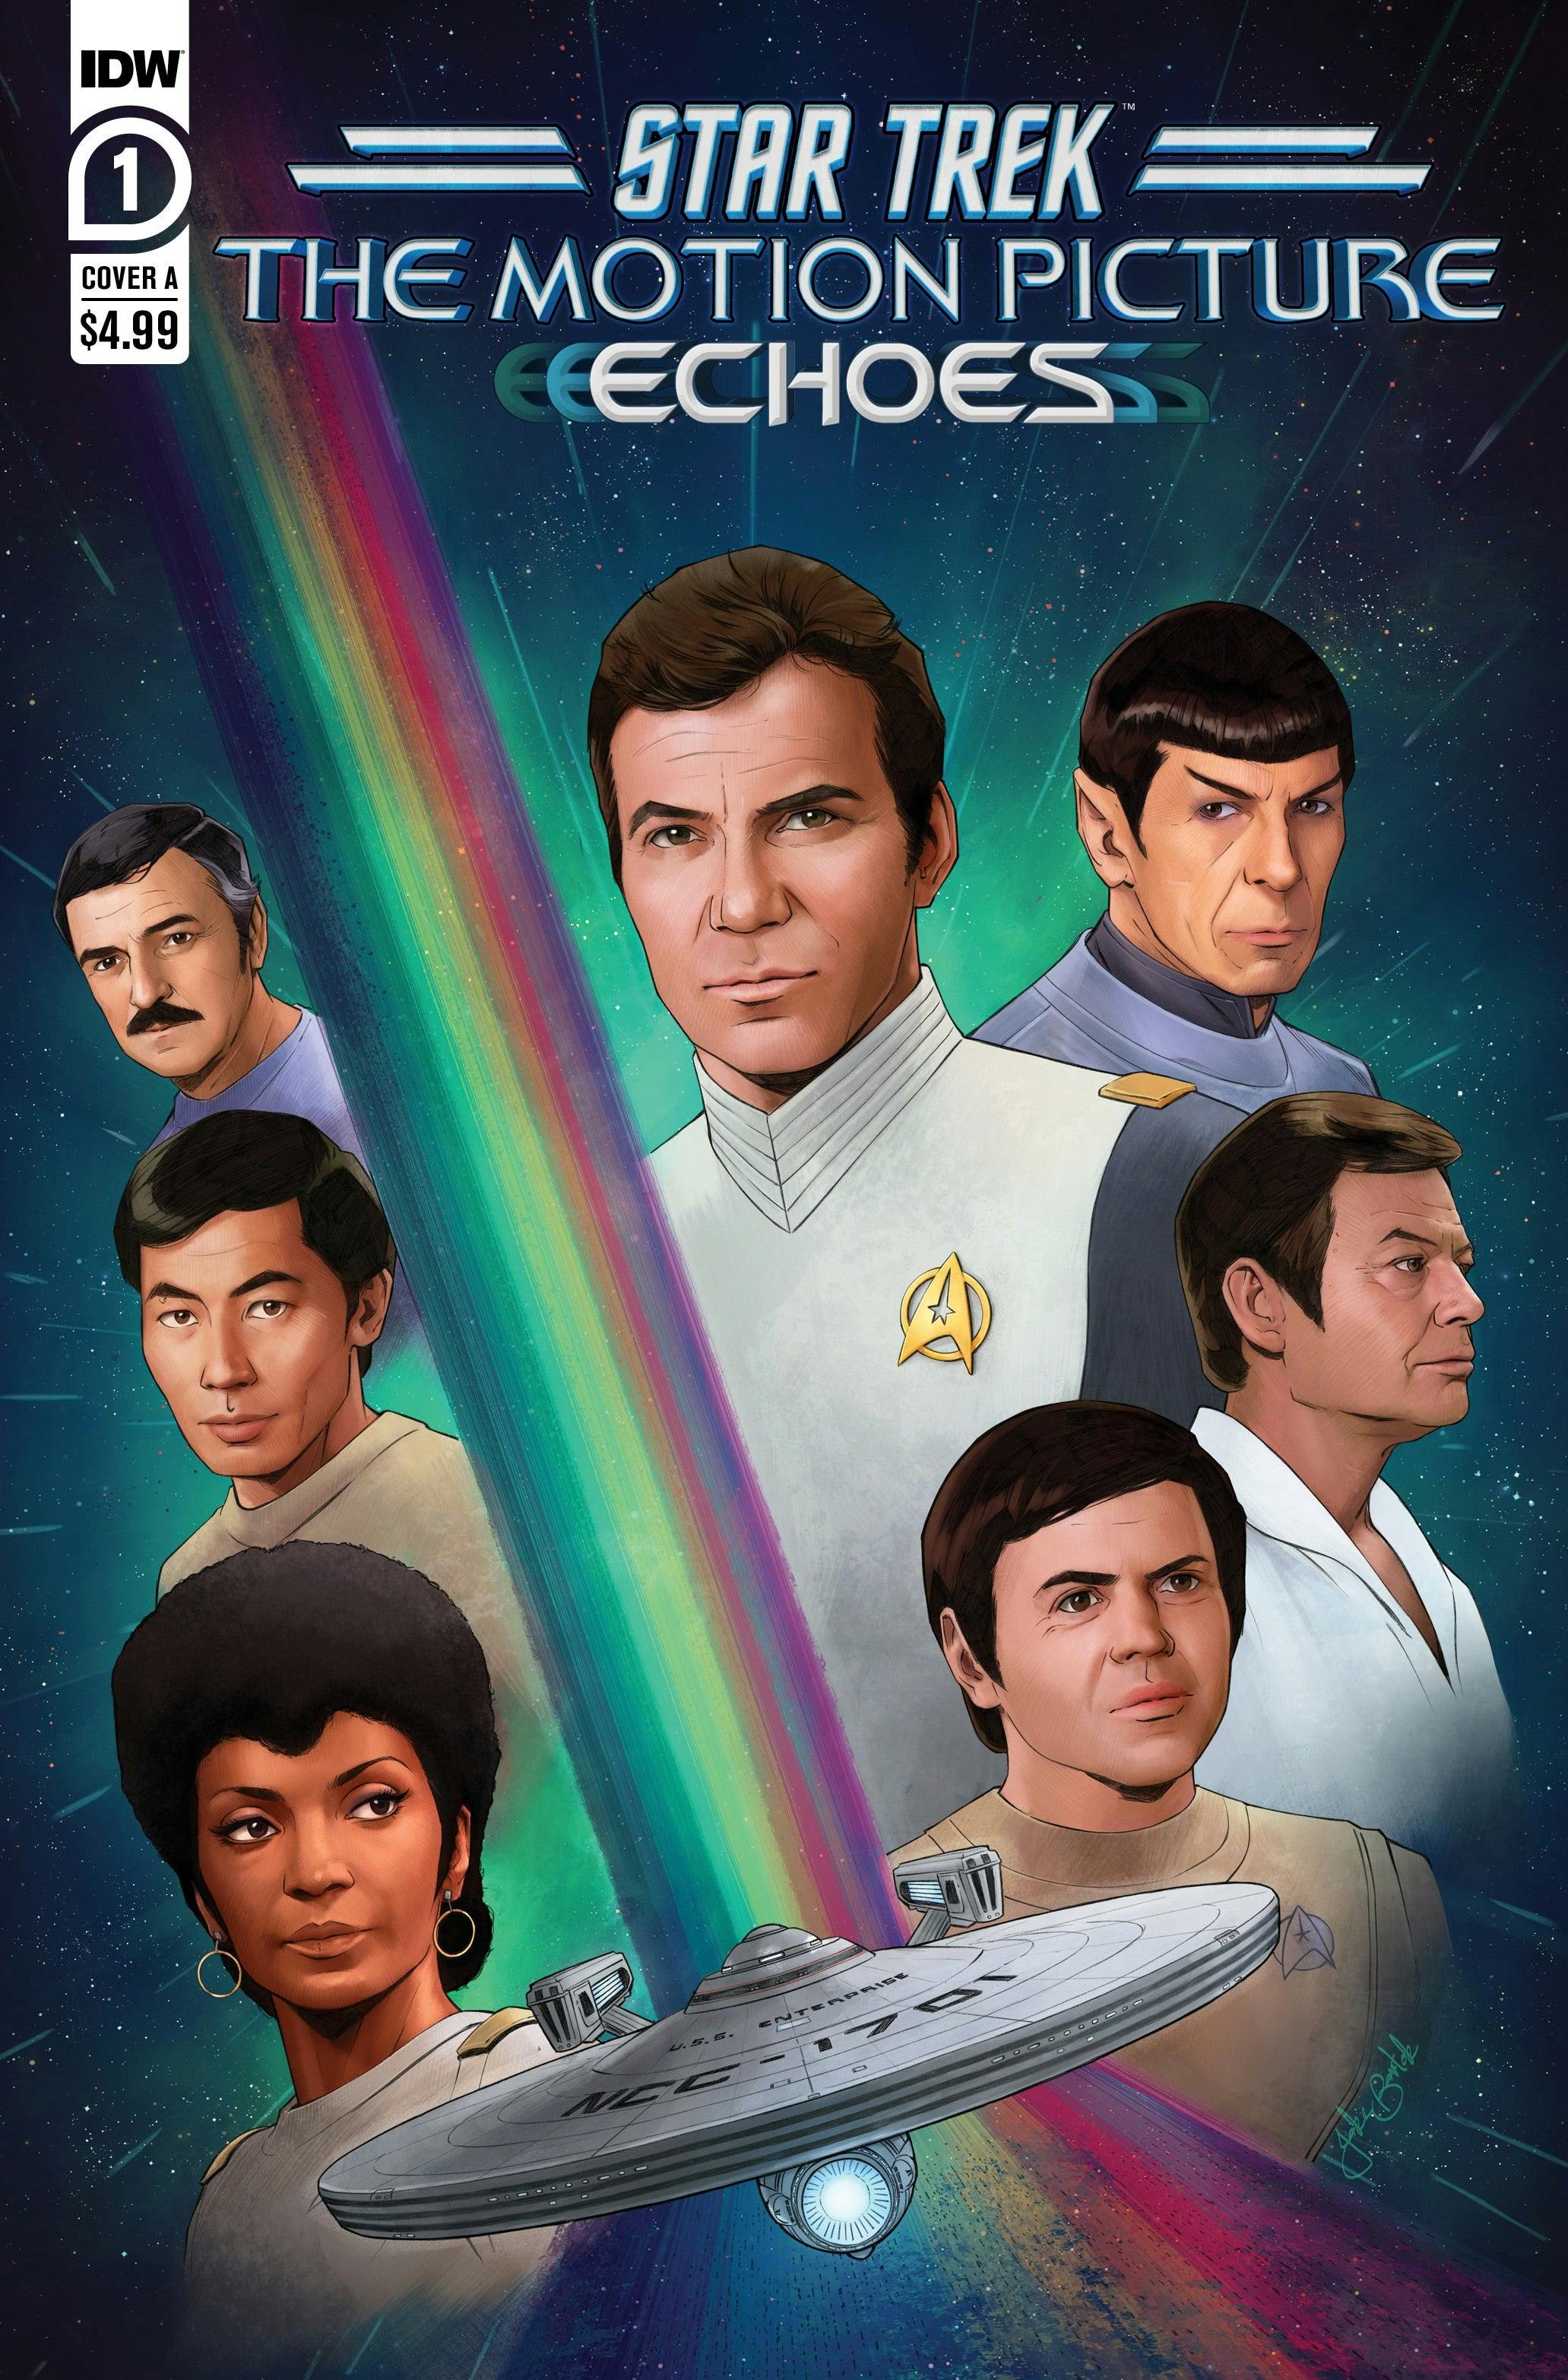 Star Trek: The Motion Picture — Echoes #1 Cover A by Jake Bartok